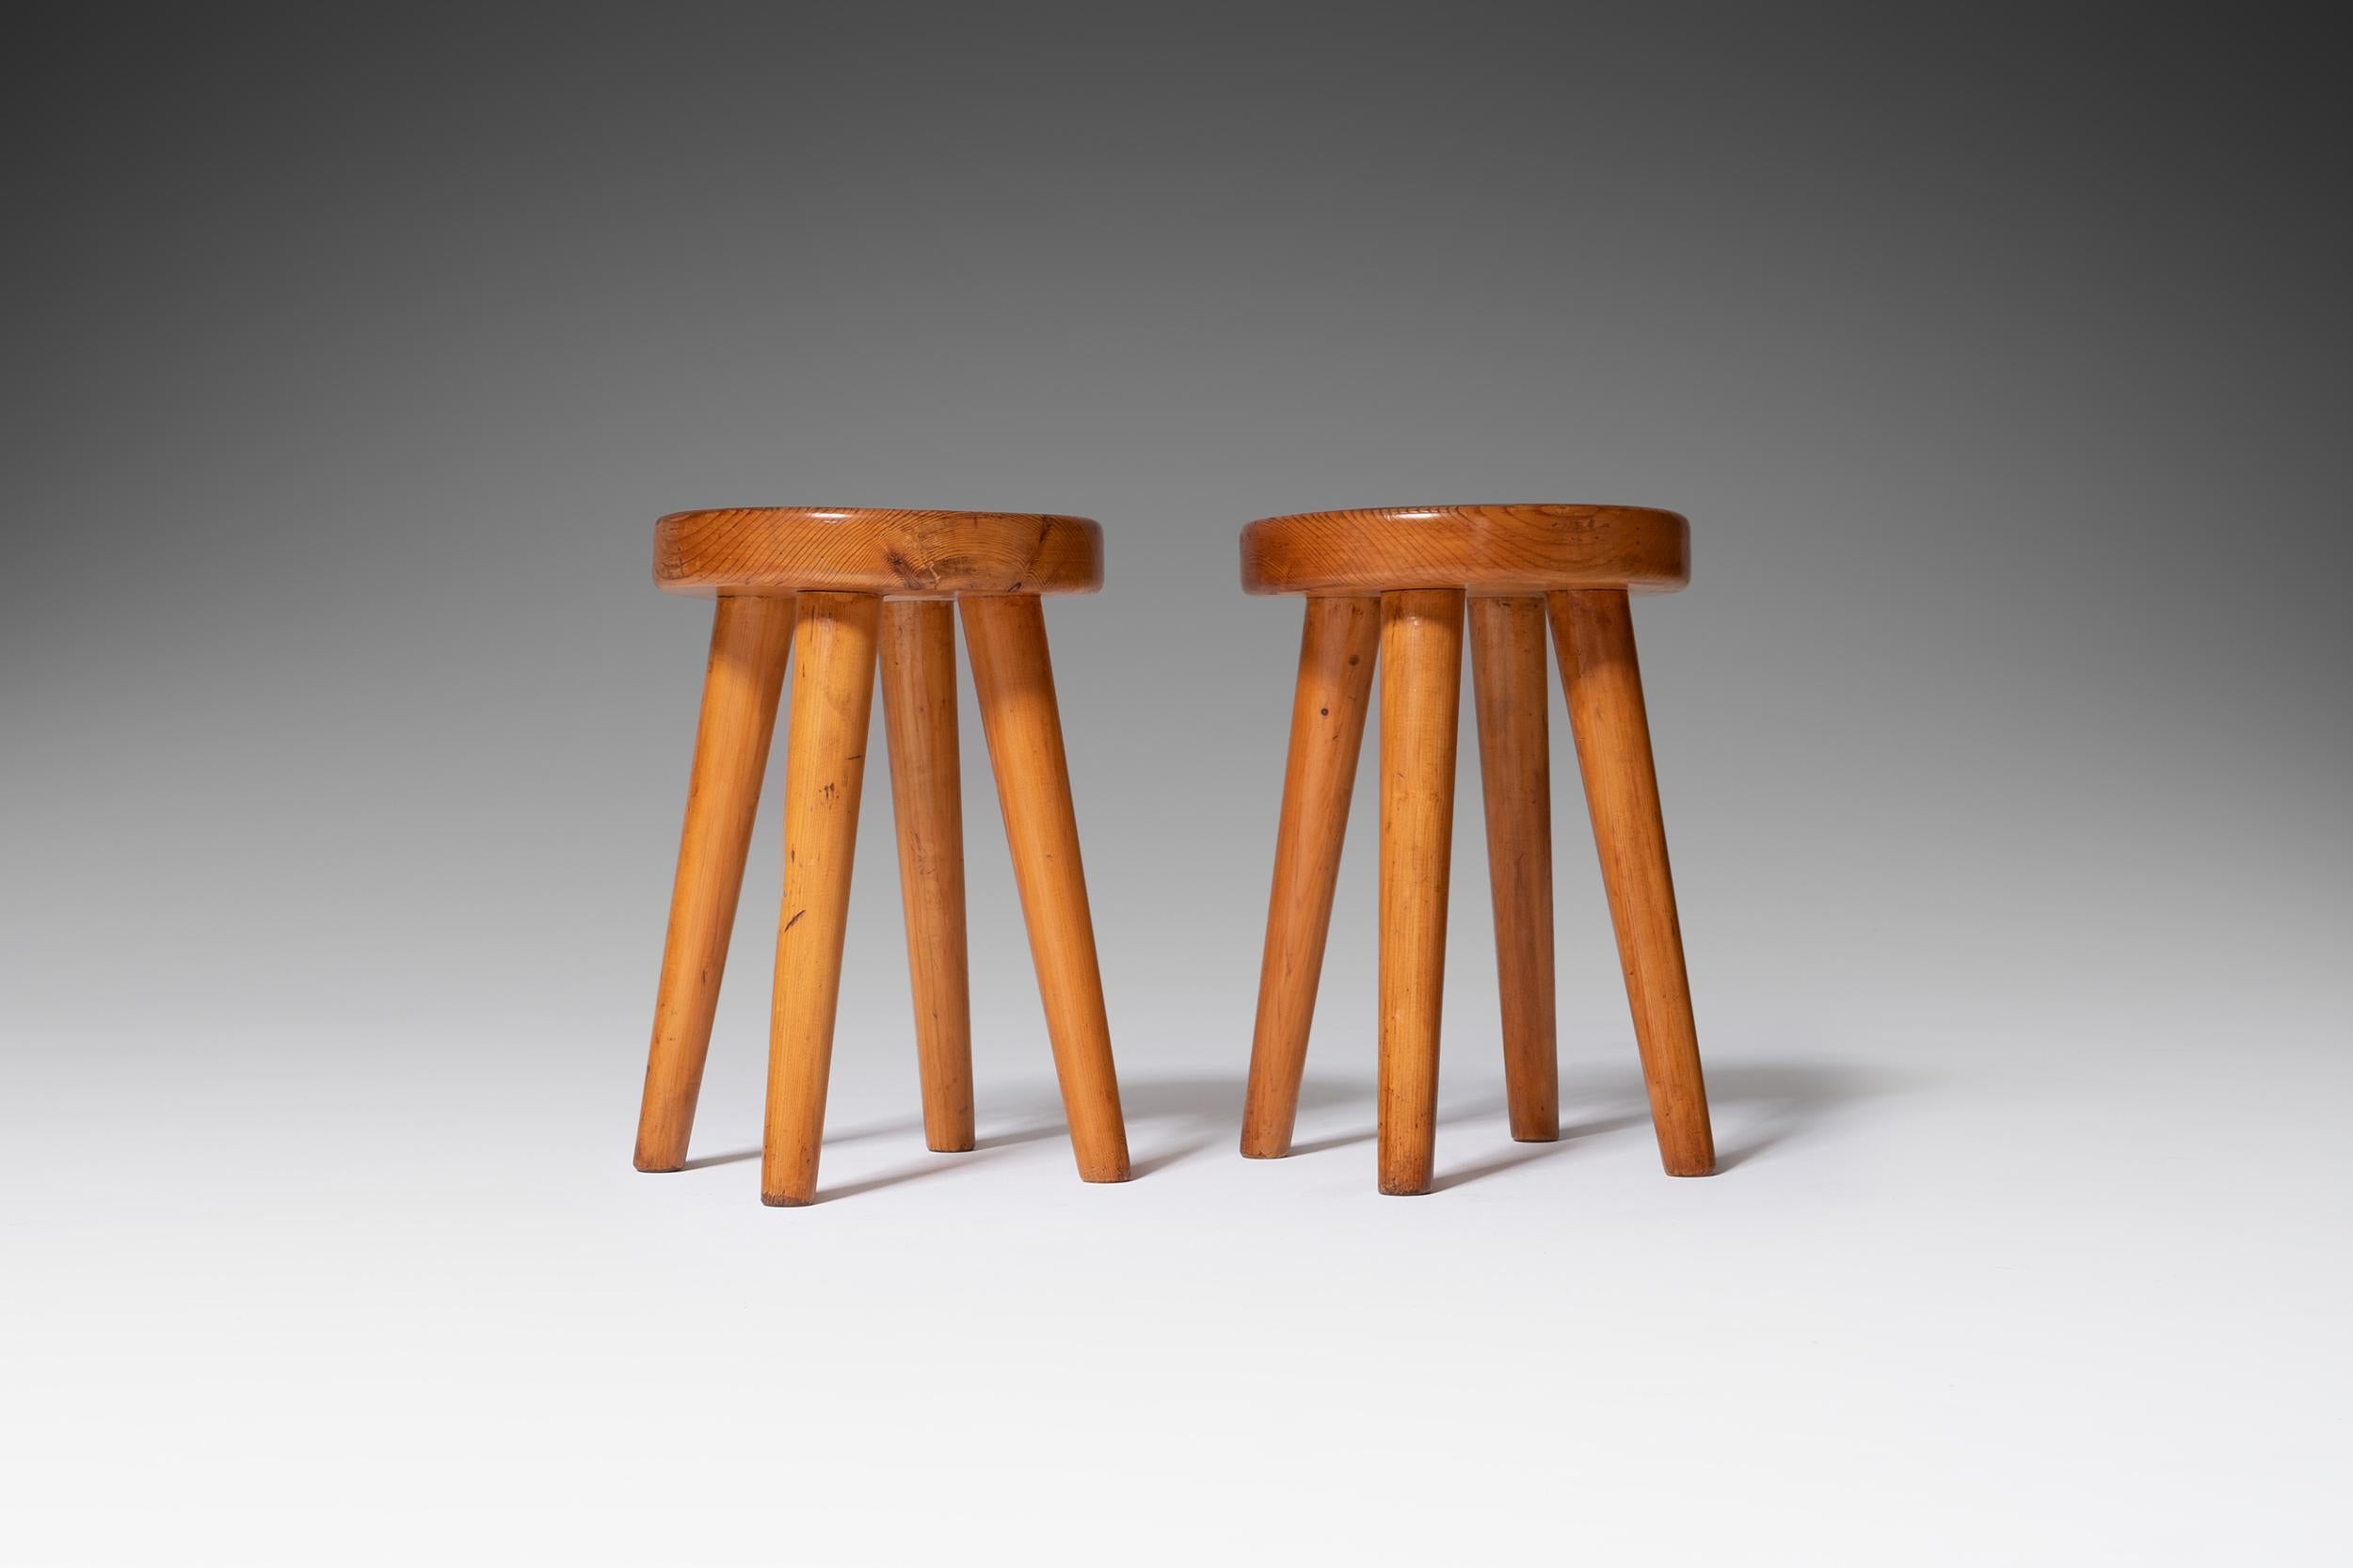 Pair of four-legged French stools in the style of Charlotte Perriand for the Les Arcs Ski resort.
The solid pine stools shows an incredible patina.